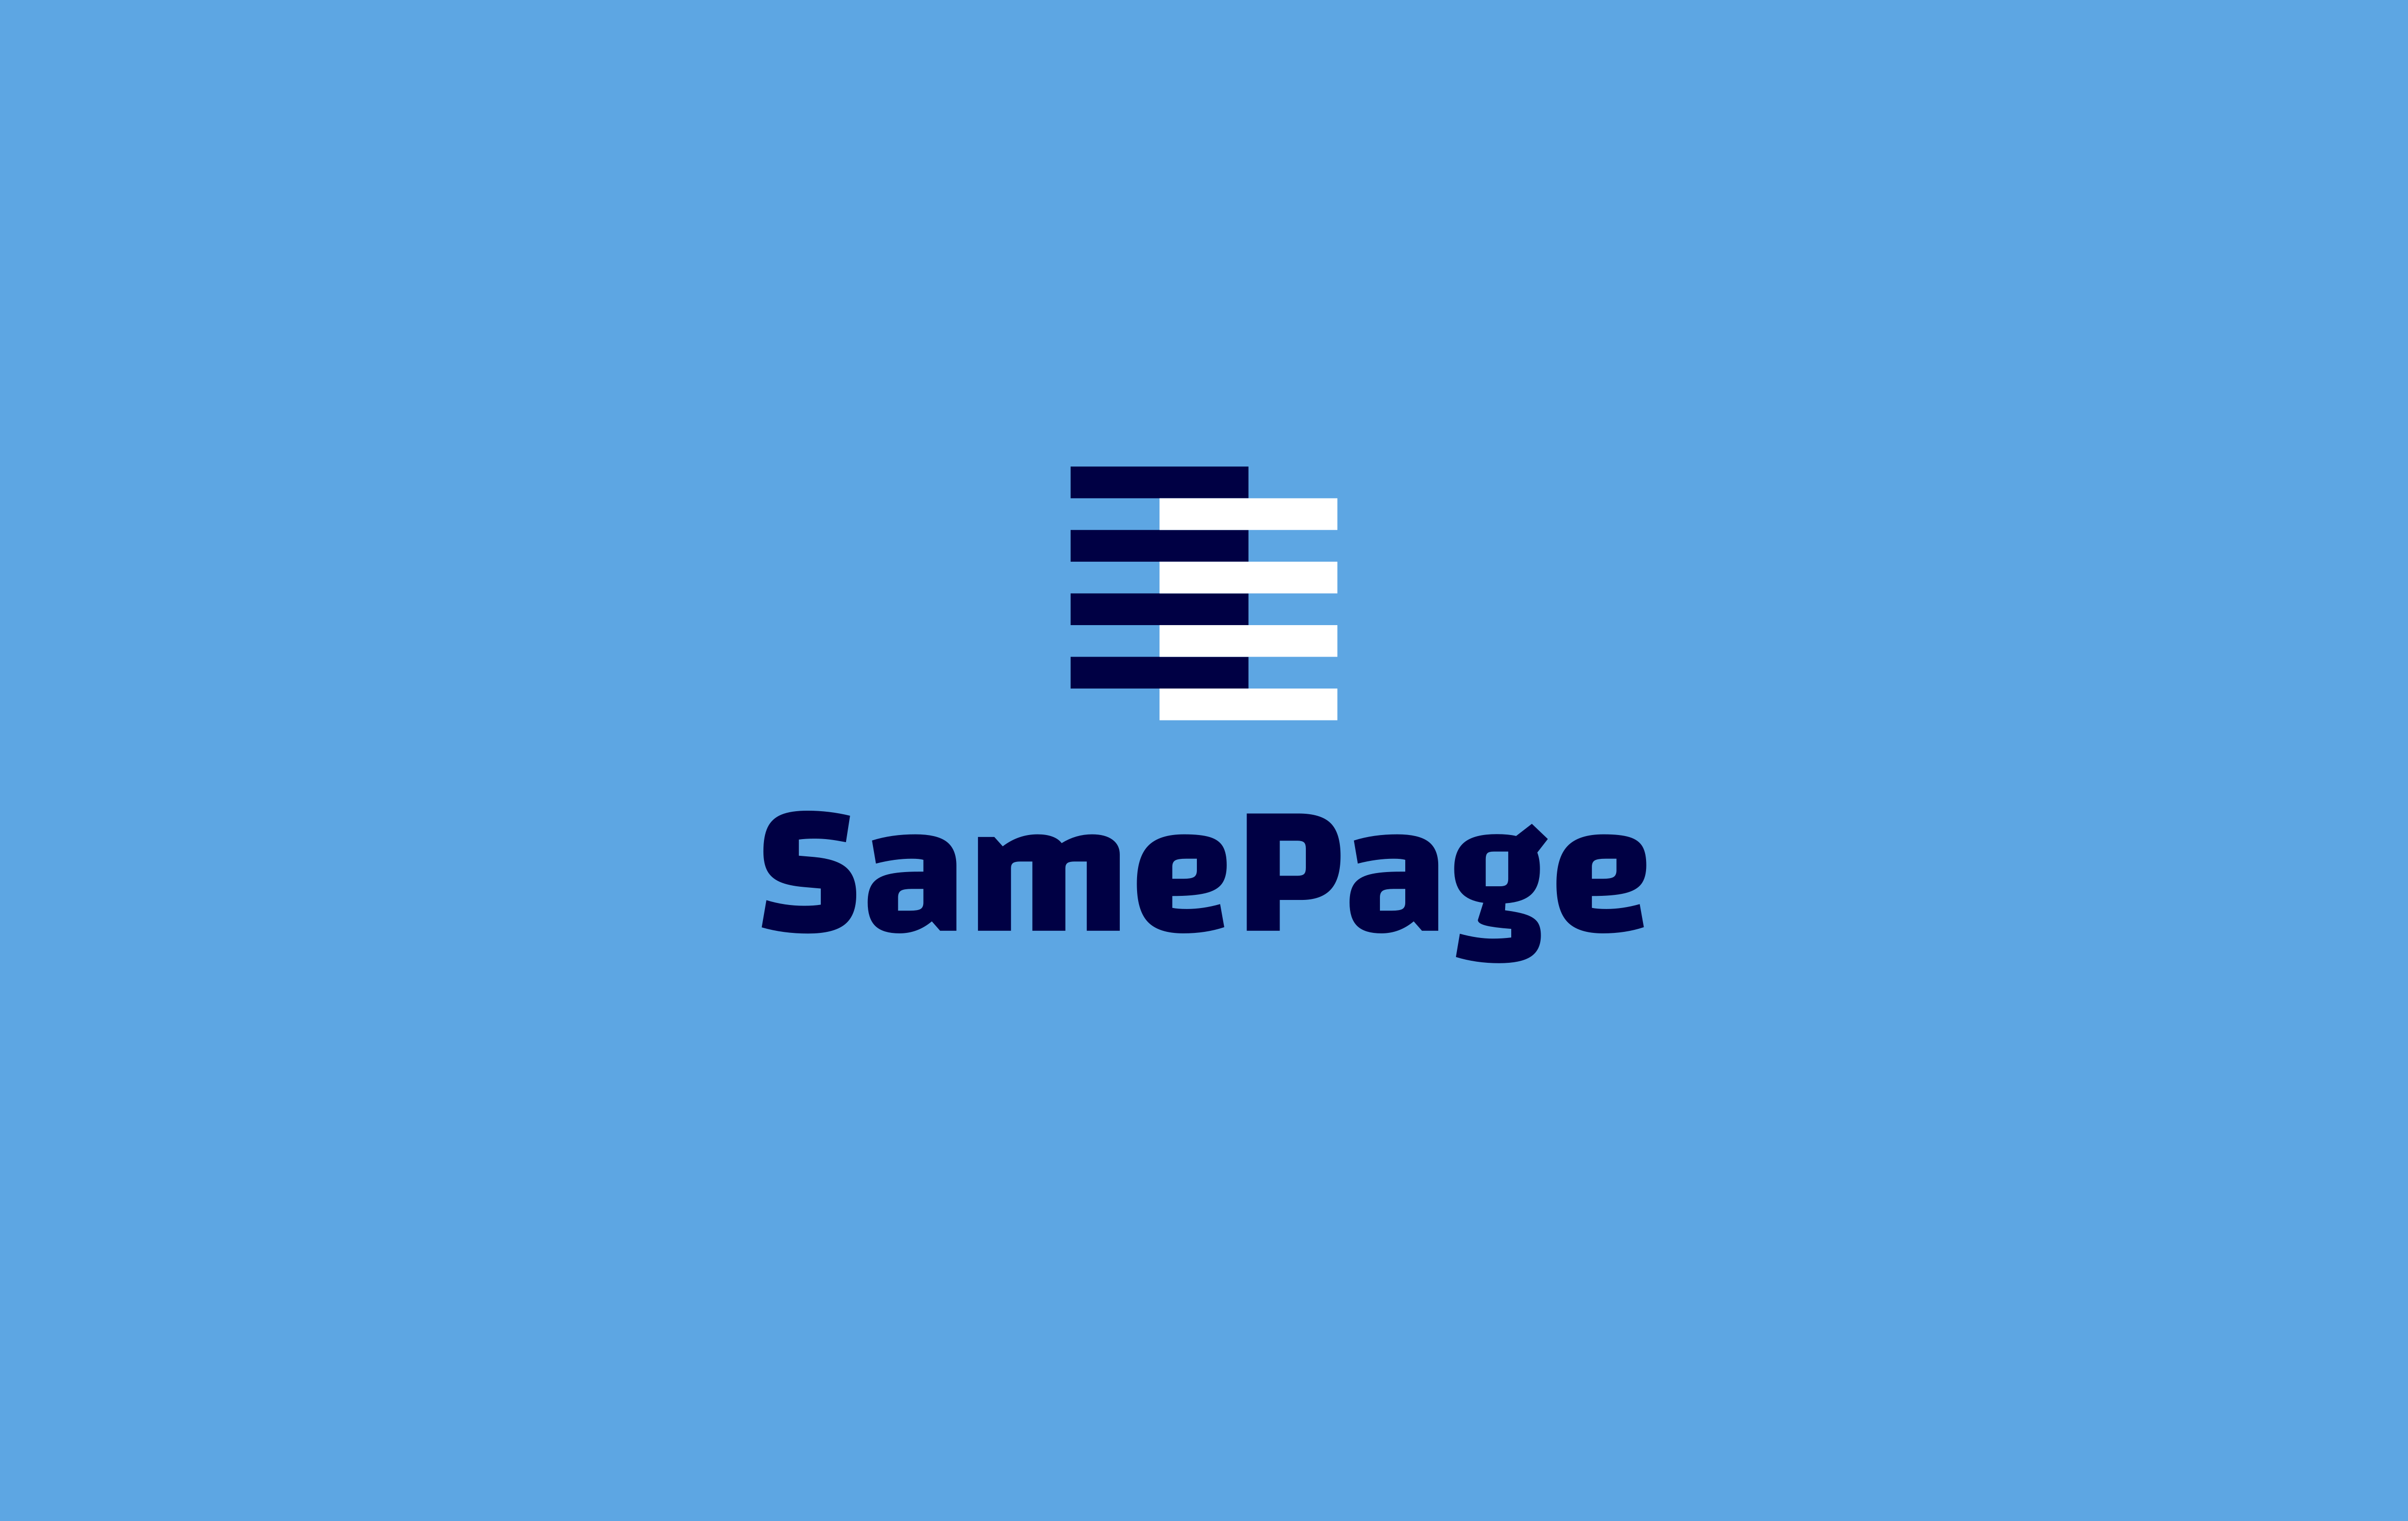 the_vision_for_samepage.md